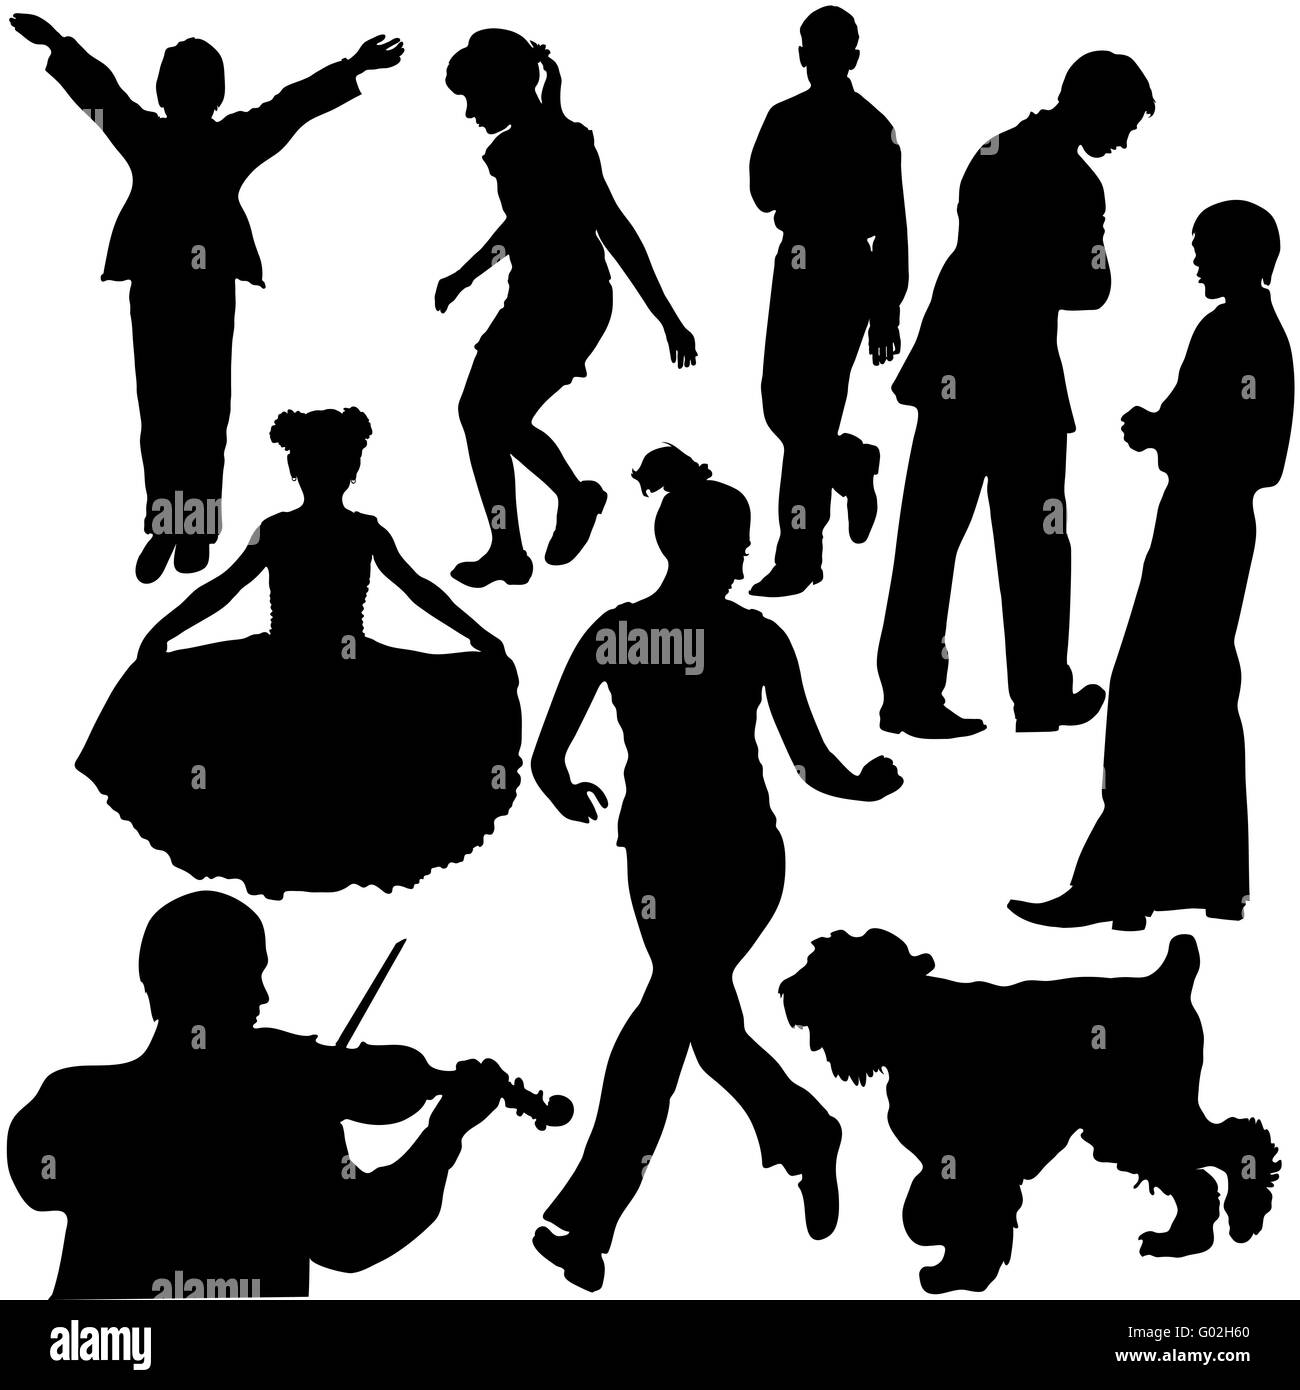 Silhouettes of people in different situations Stock Photo